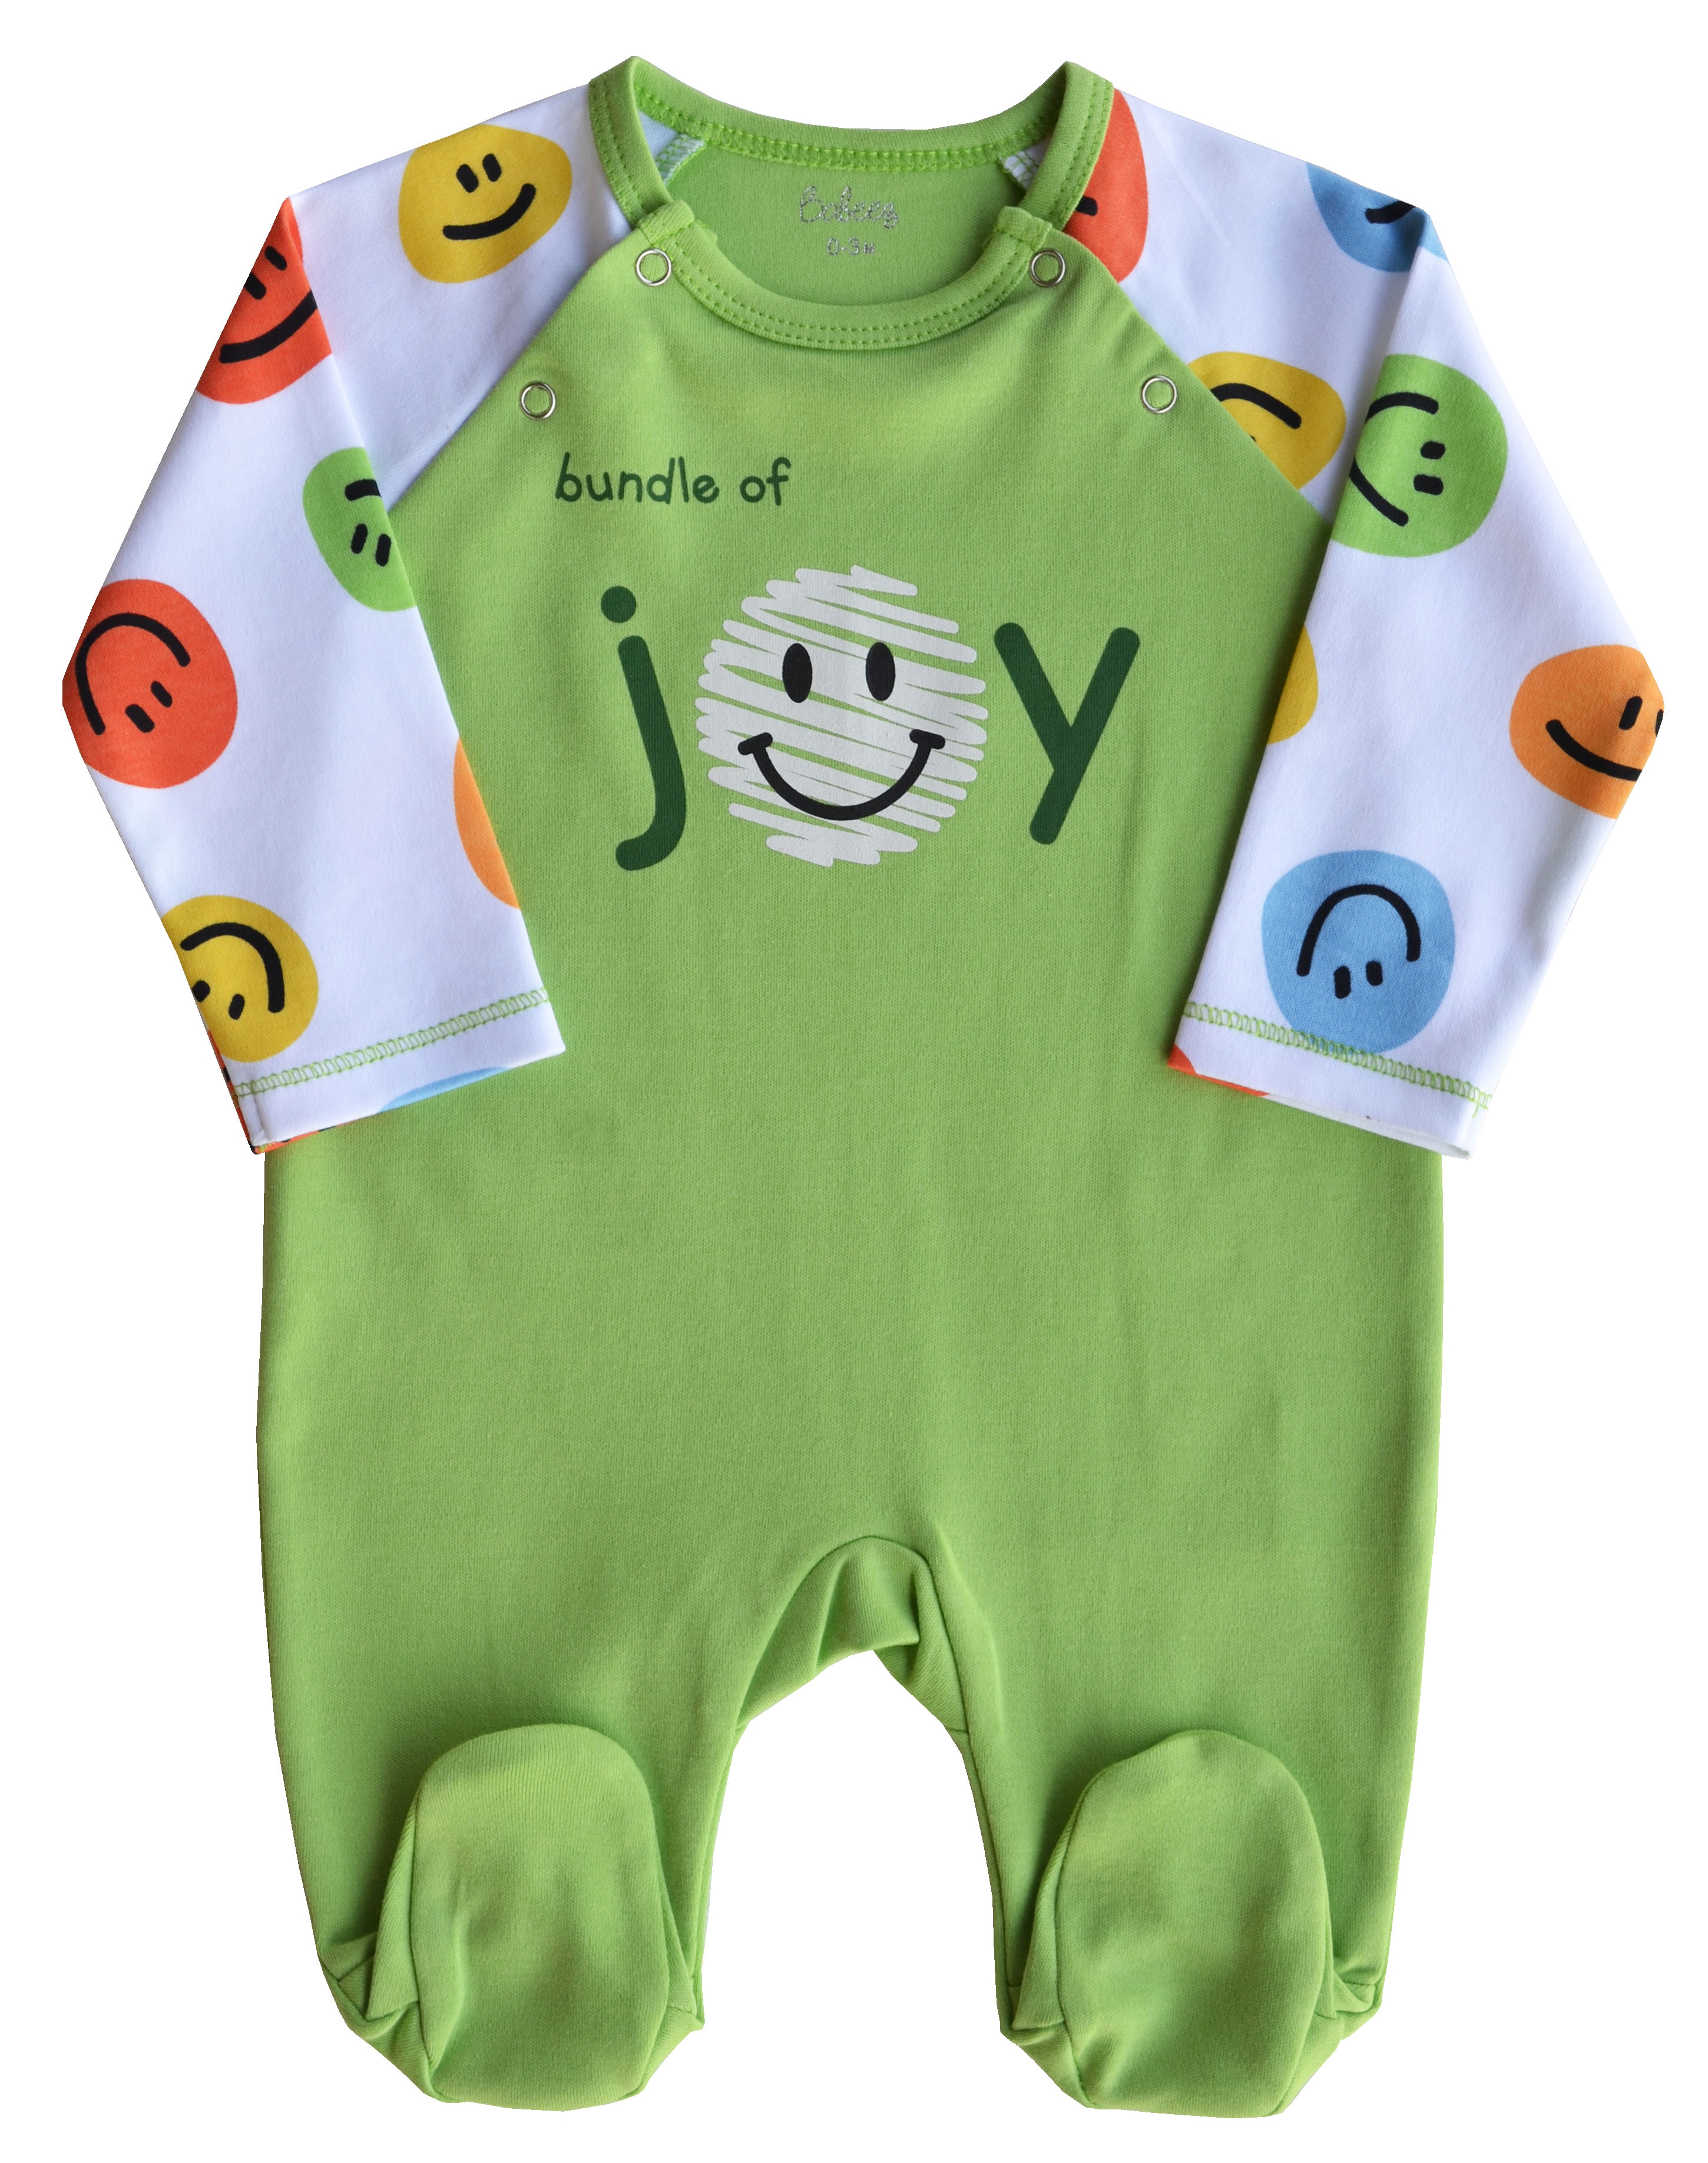 Green Full Romper/Sleeper with feet and smiley printed on sleeves(100% Cotton Interlock)